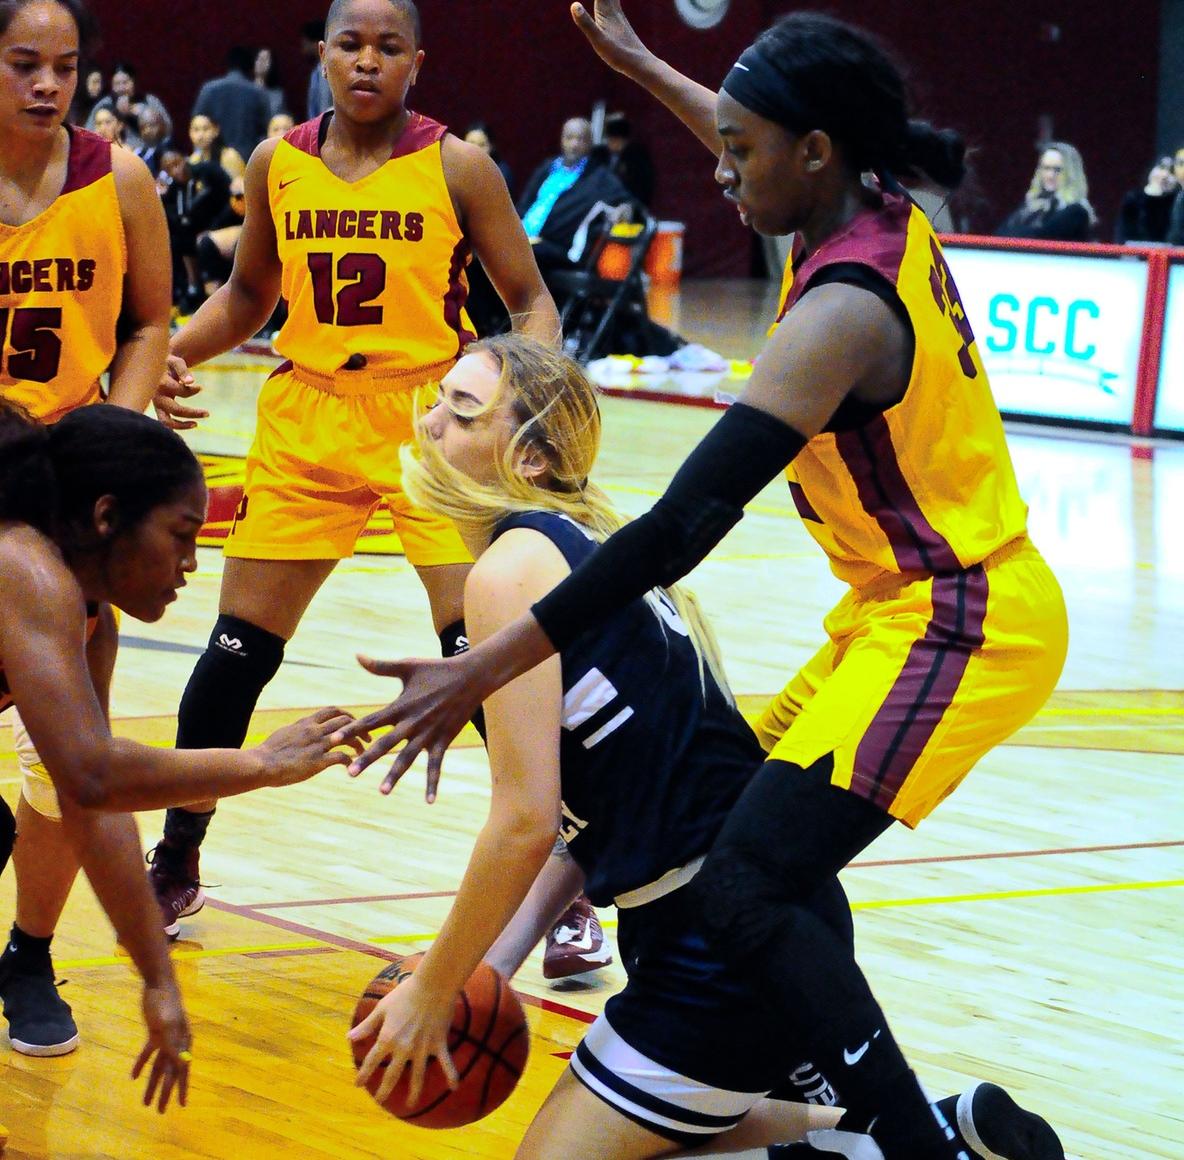 Women's basketball team picks up important road victory